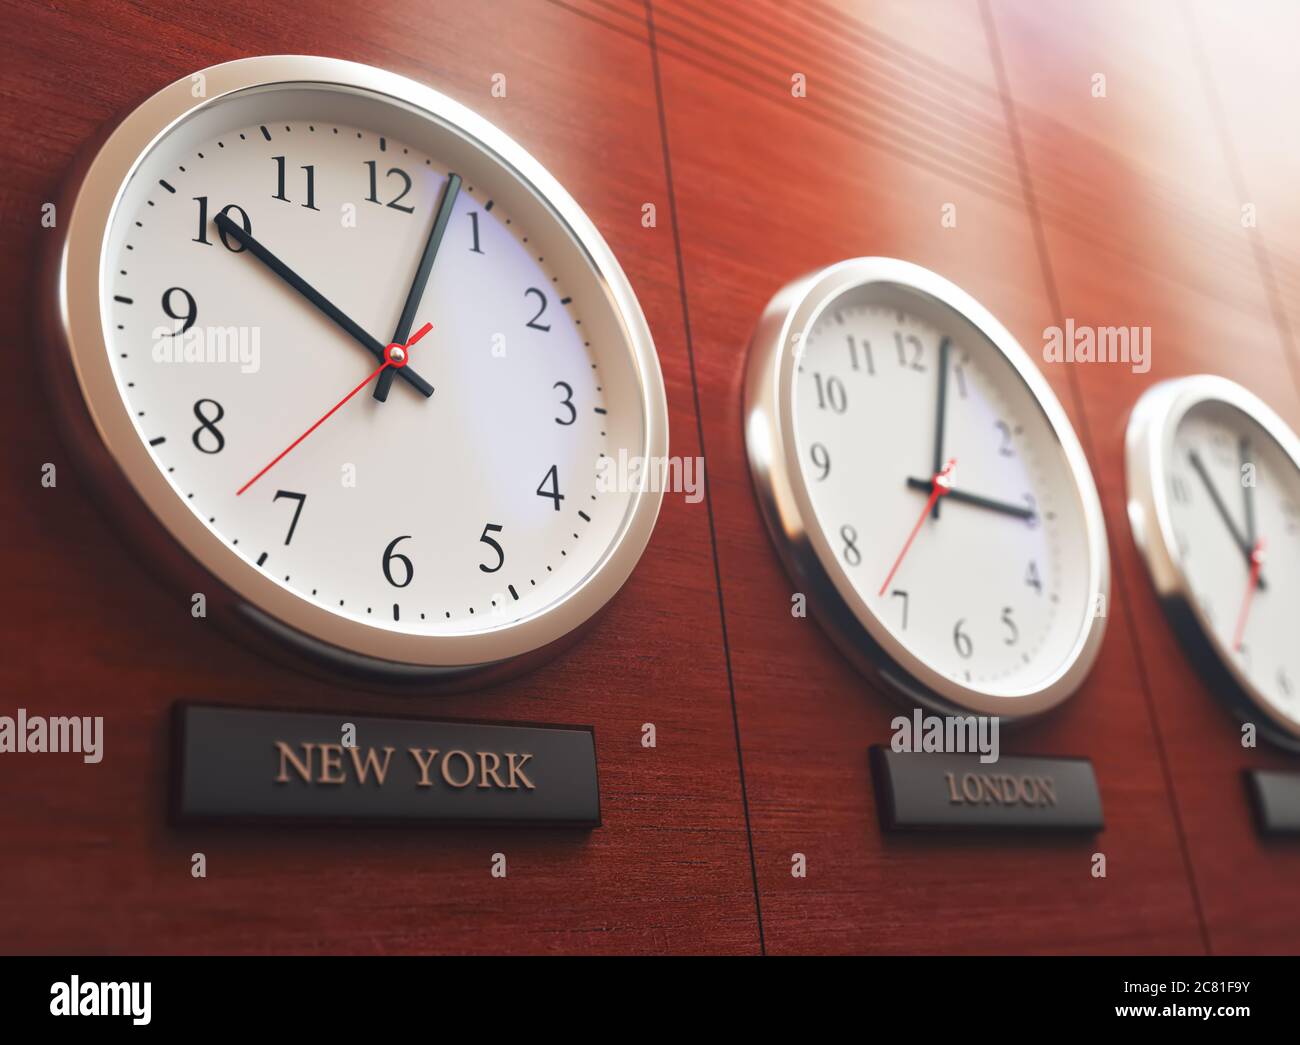 World wide time zone clock. Clocks on the wall, showing the time around the world. Stock Photo